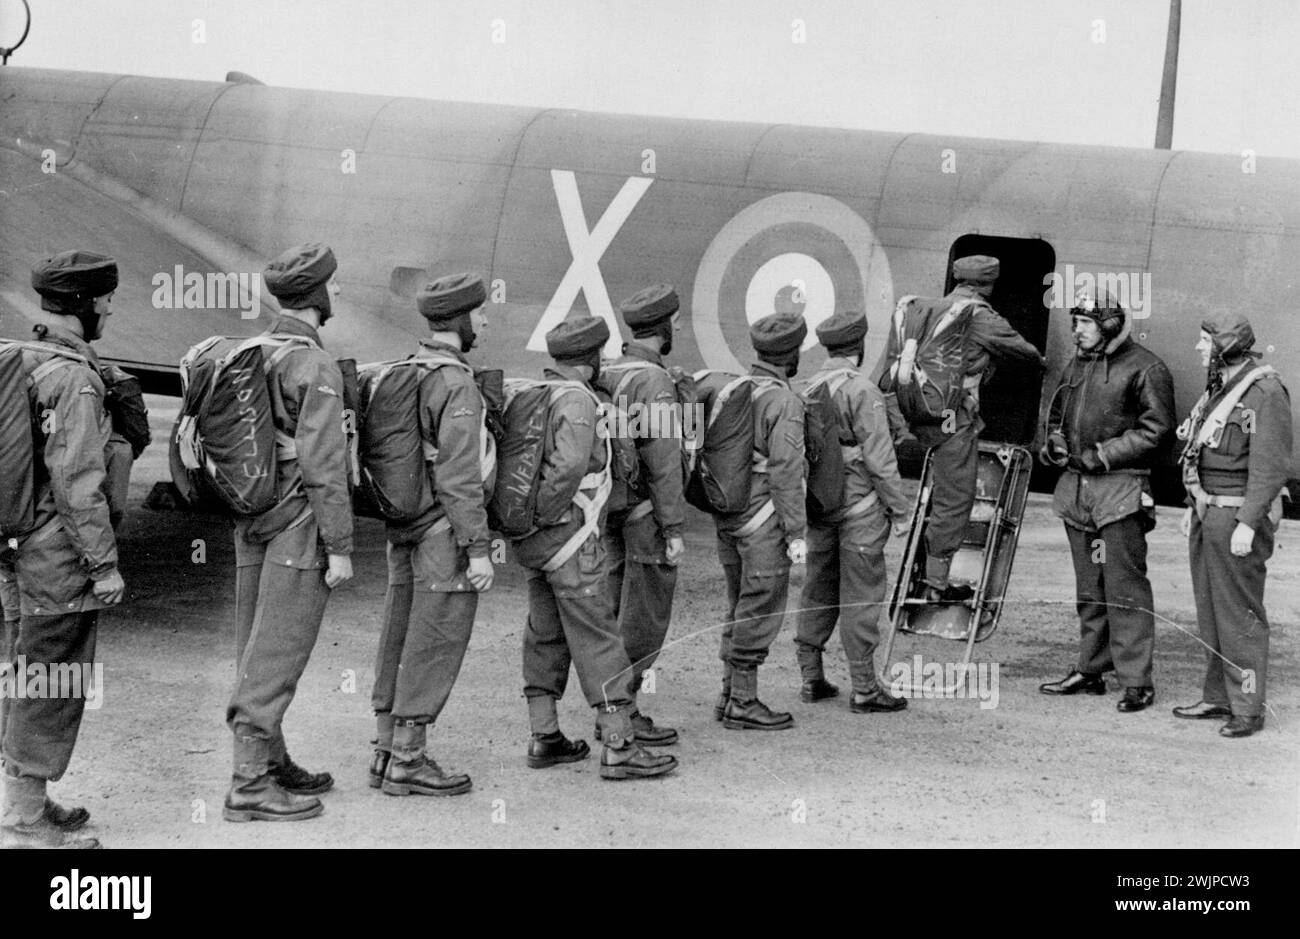 Britain's Paratroops in Training -- Paratroops emplaning in Whitley aircraft. These Pictured taken at an R.A.F. Station where parachute troops are in training show the varied activities of members of Britain's newest 'Army' who are in training for the important part they will have to play when Britain takes the offensive on land. October 23, 1941. (Photo by Planet News Ltd.). Stock Photo